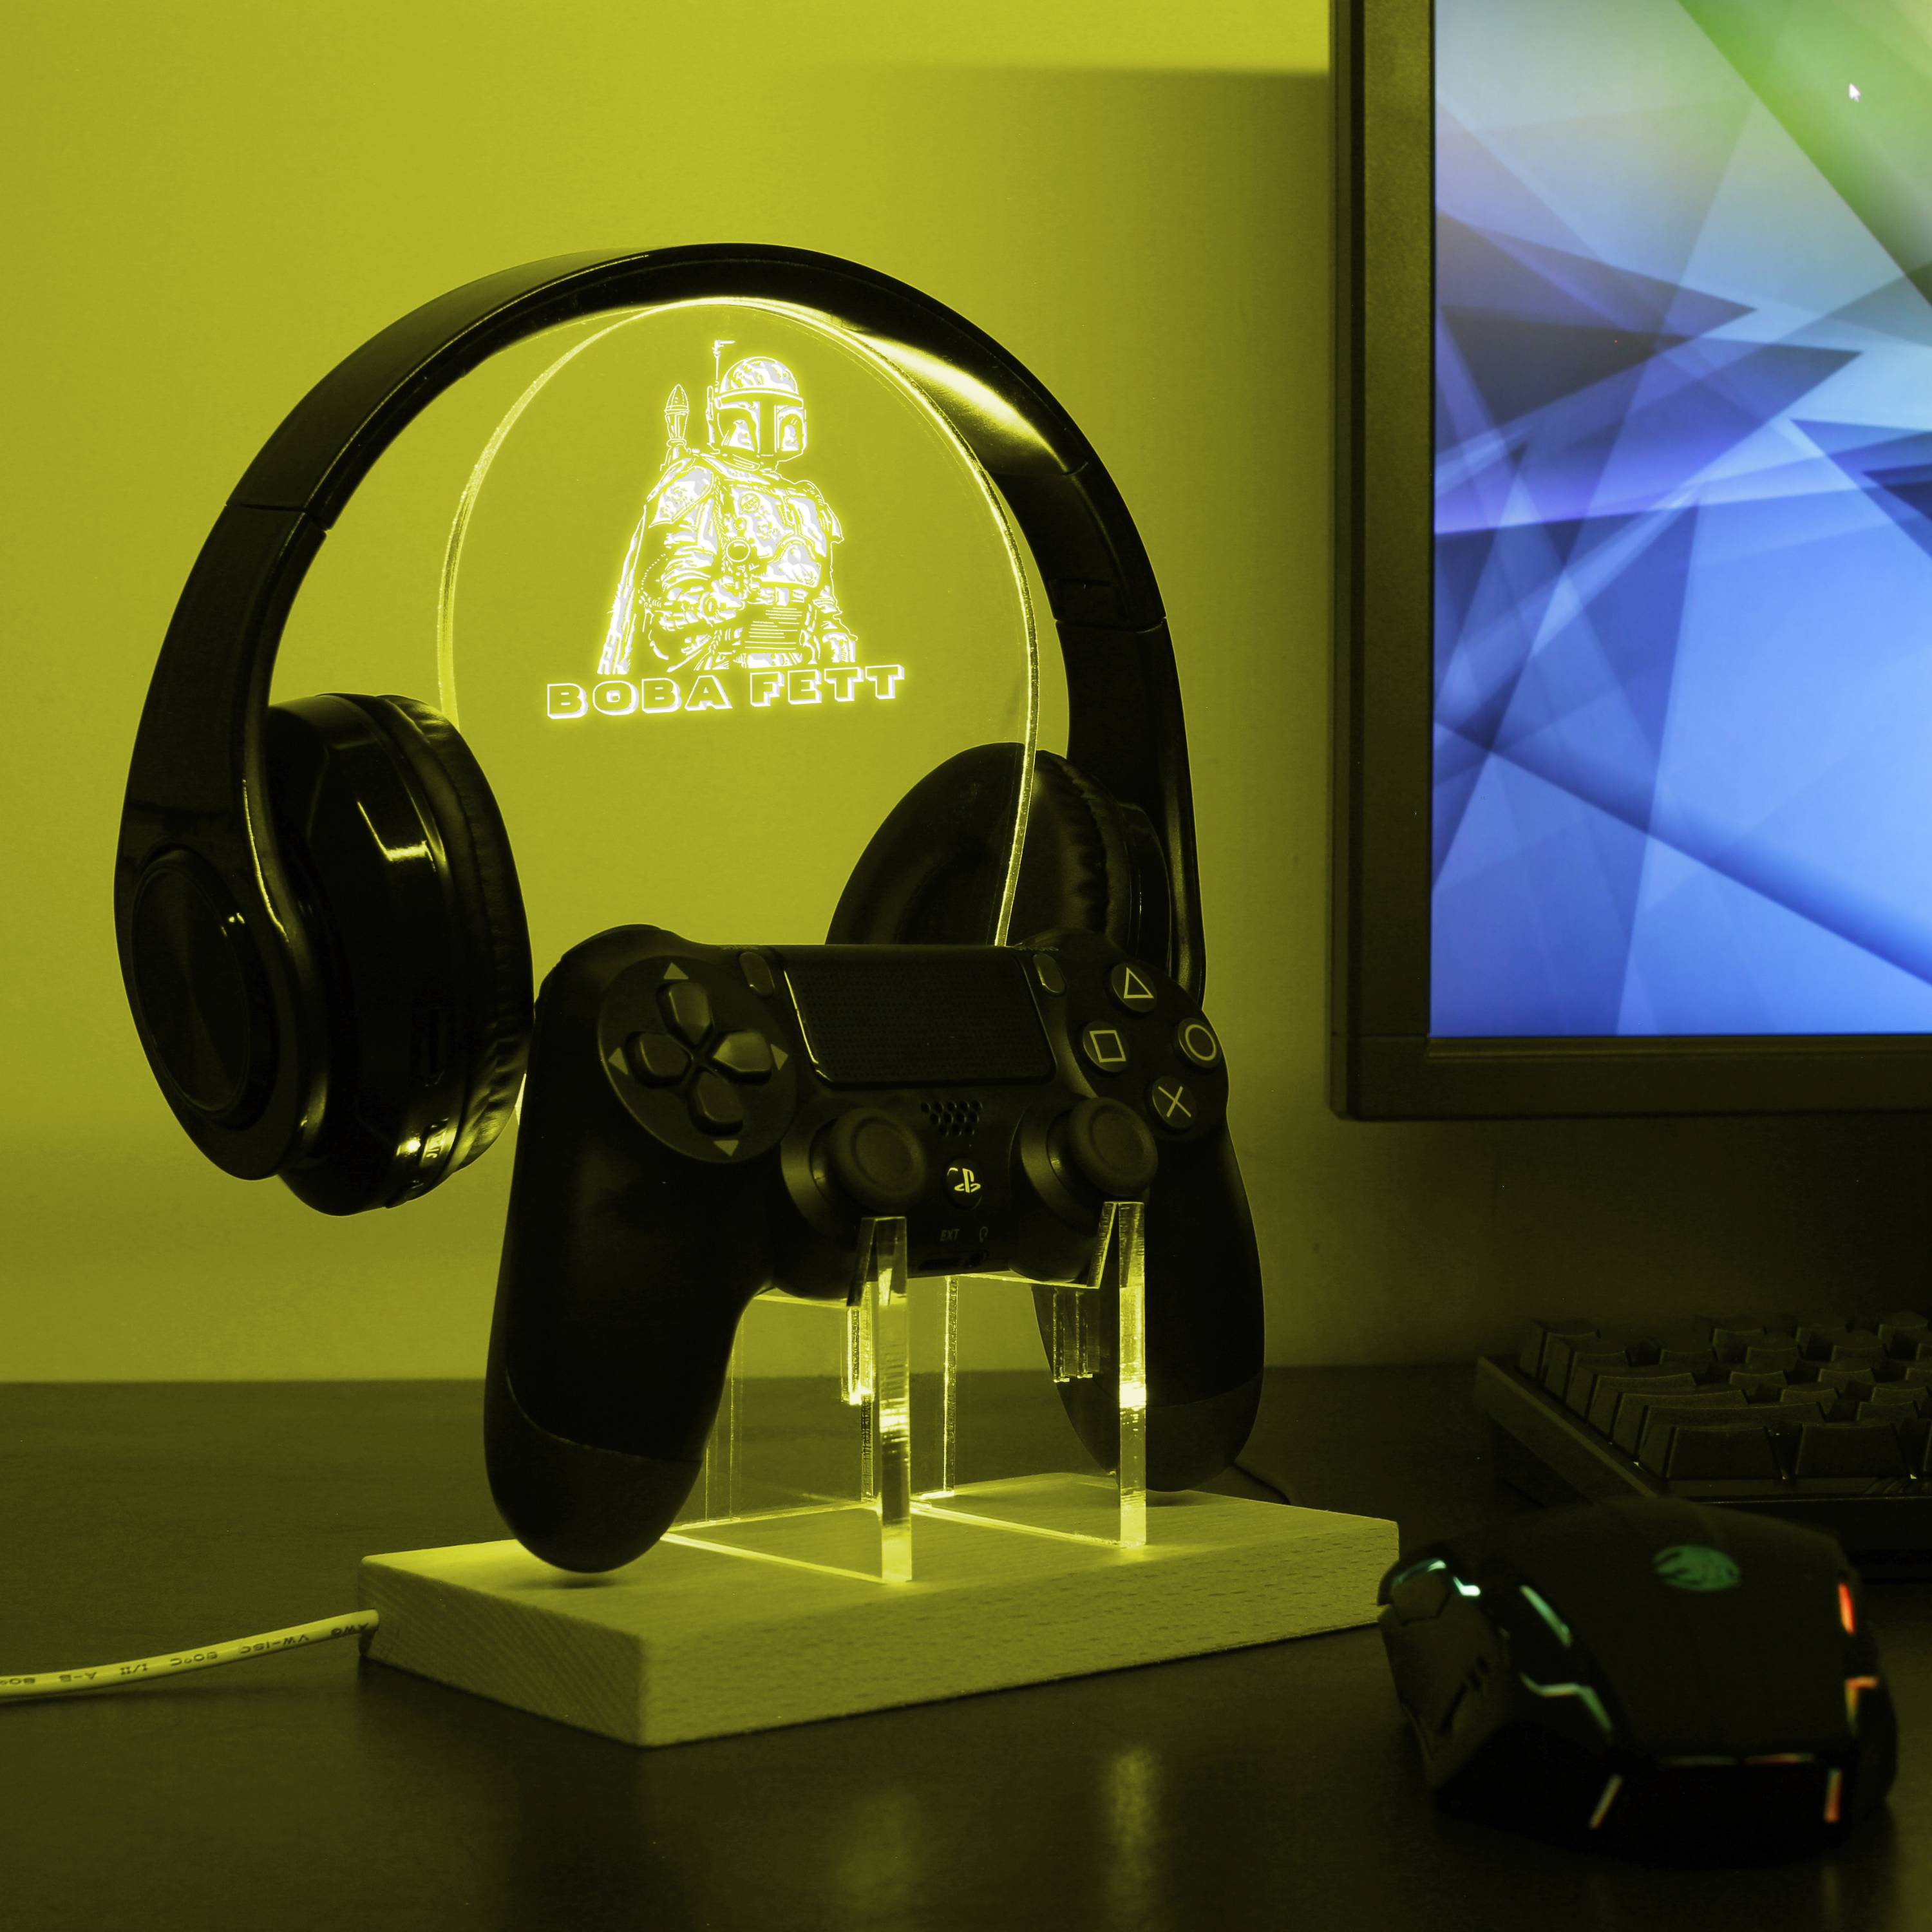 Boba Fett 2 LED Gaming Headset Controller Stand